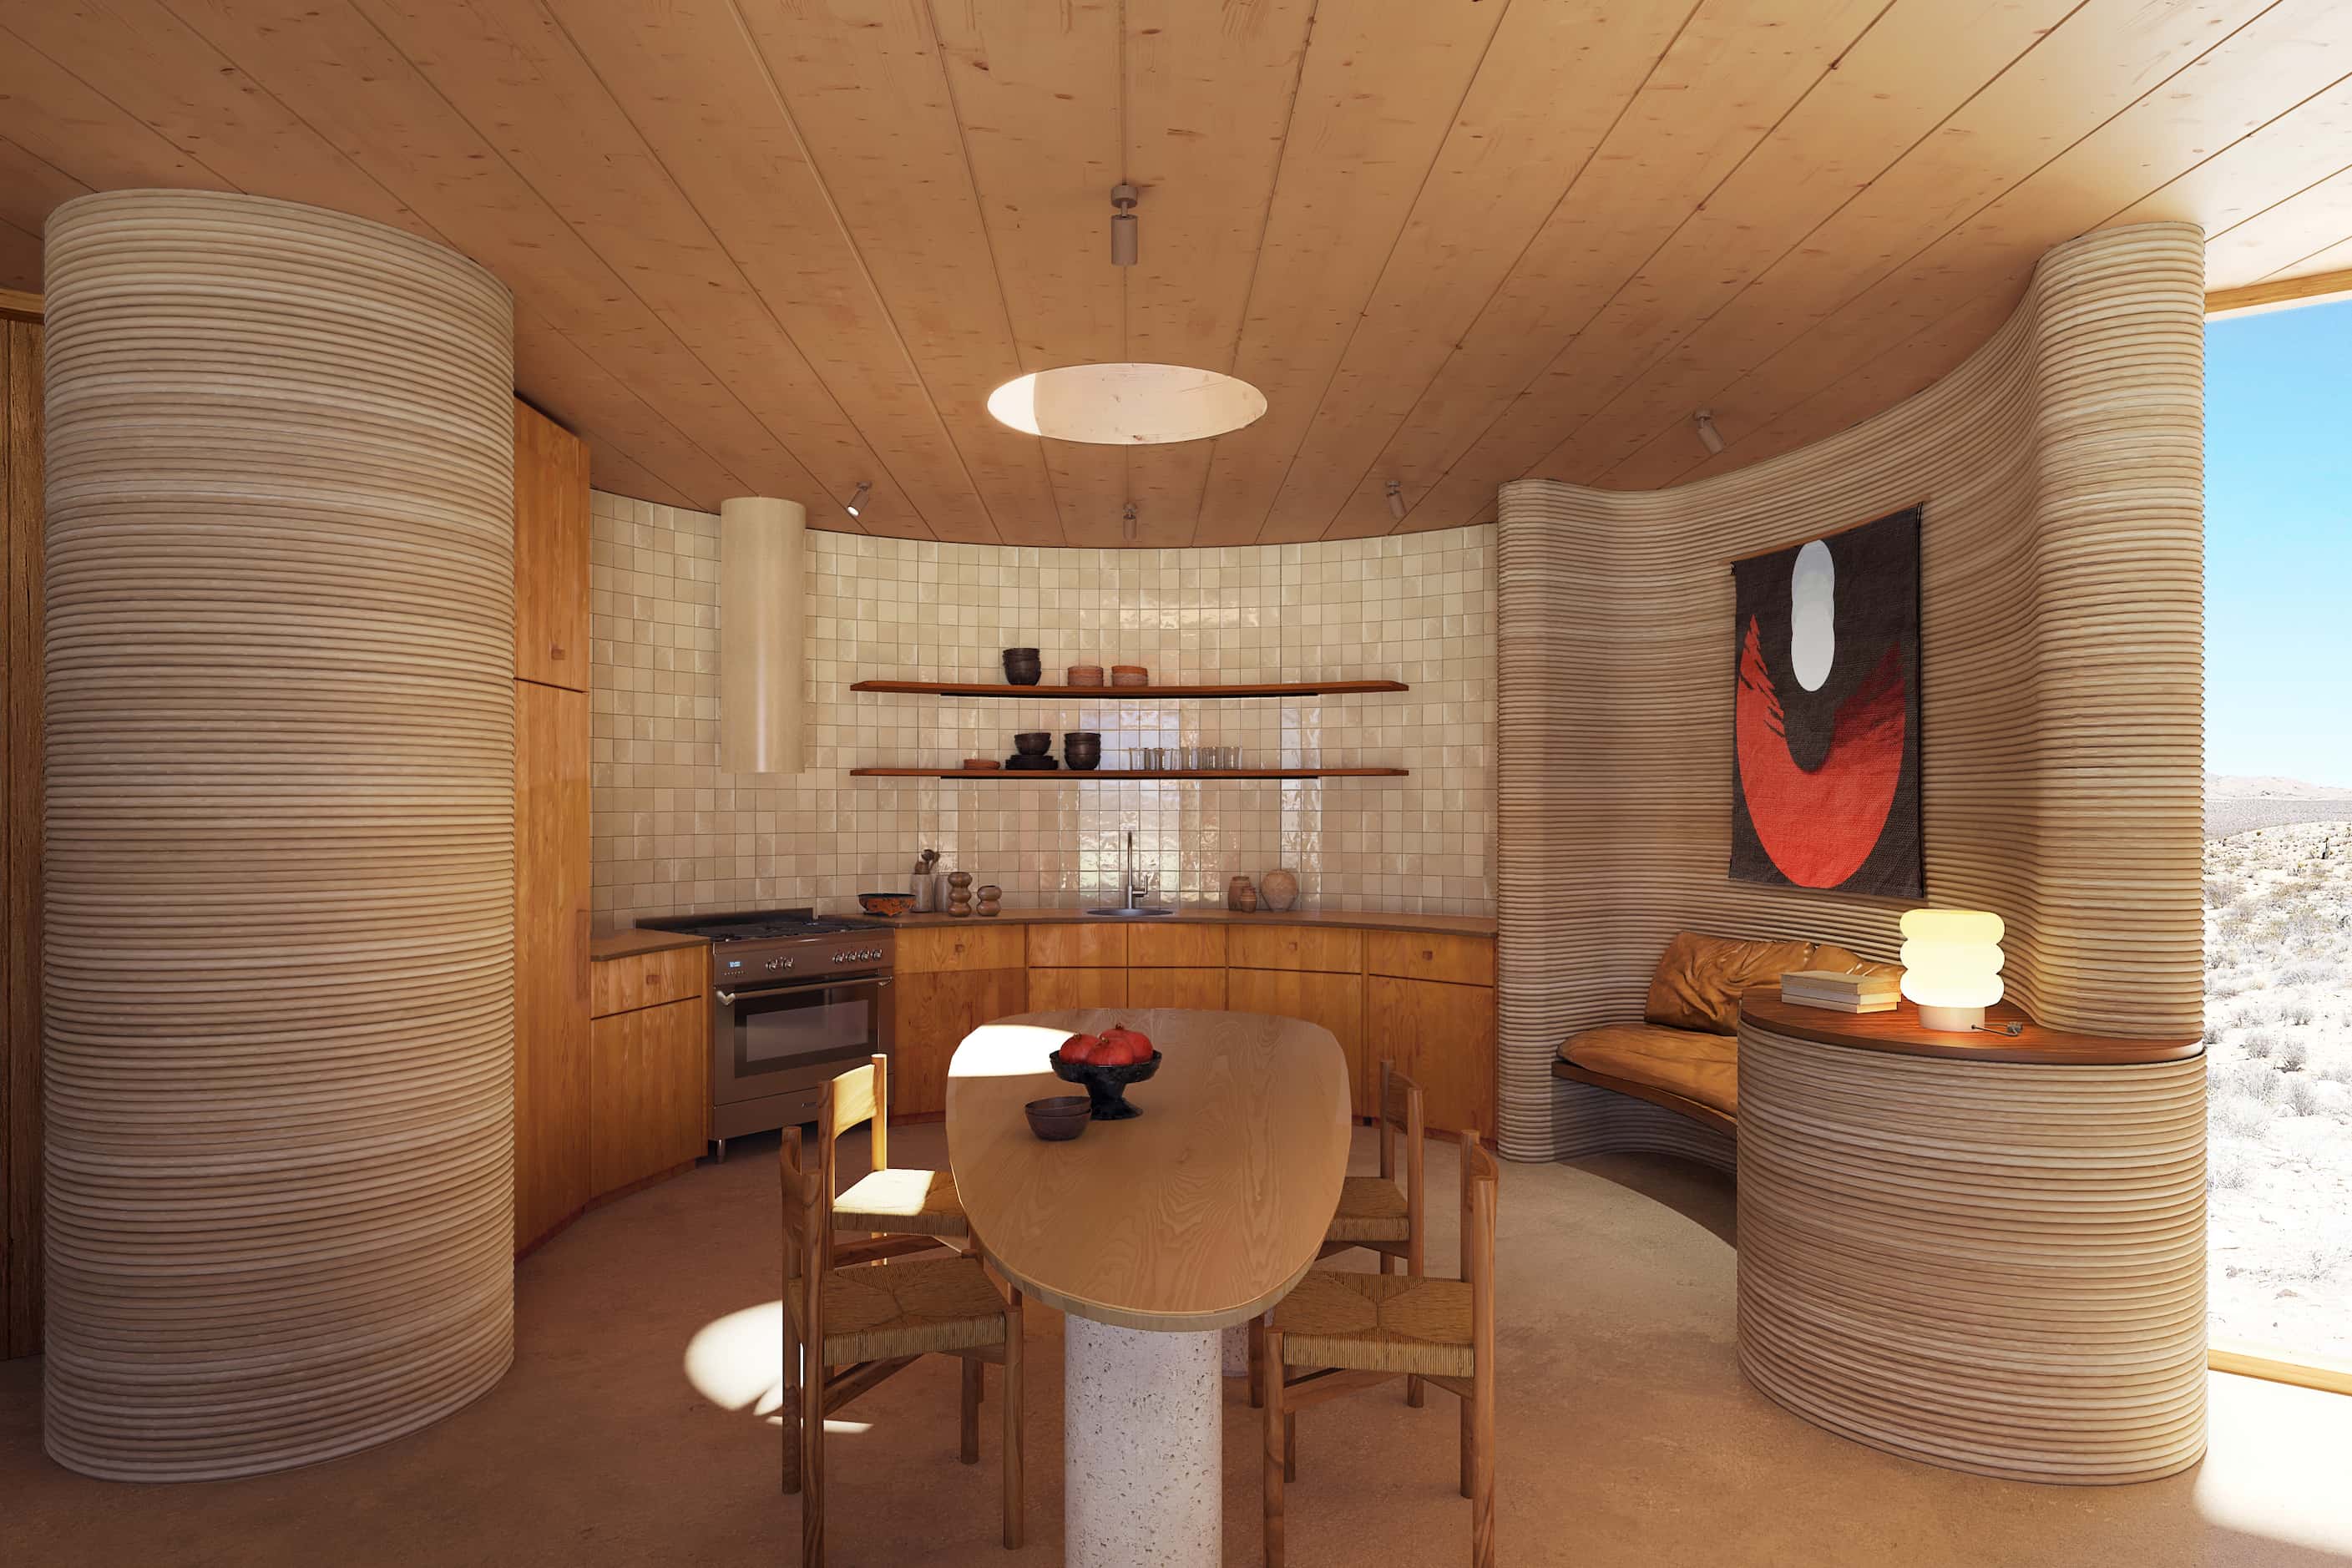 This is a concept rendering of a kitchen within a two-bedroom home at the new El Cosmico....